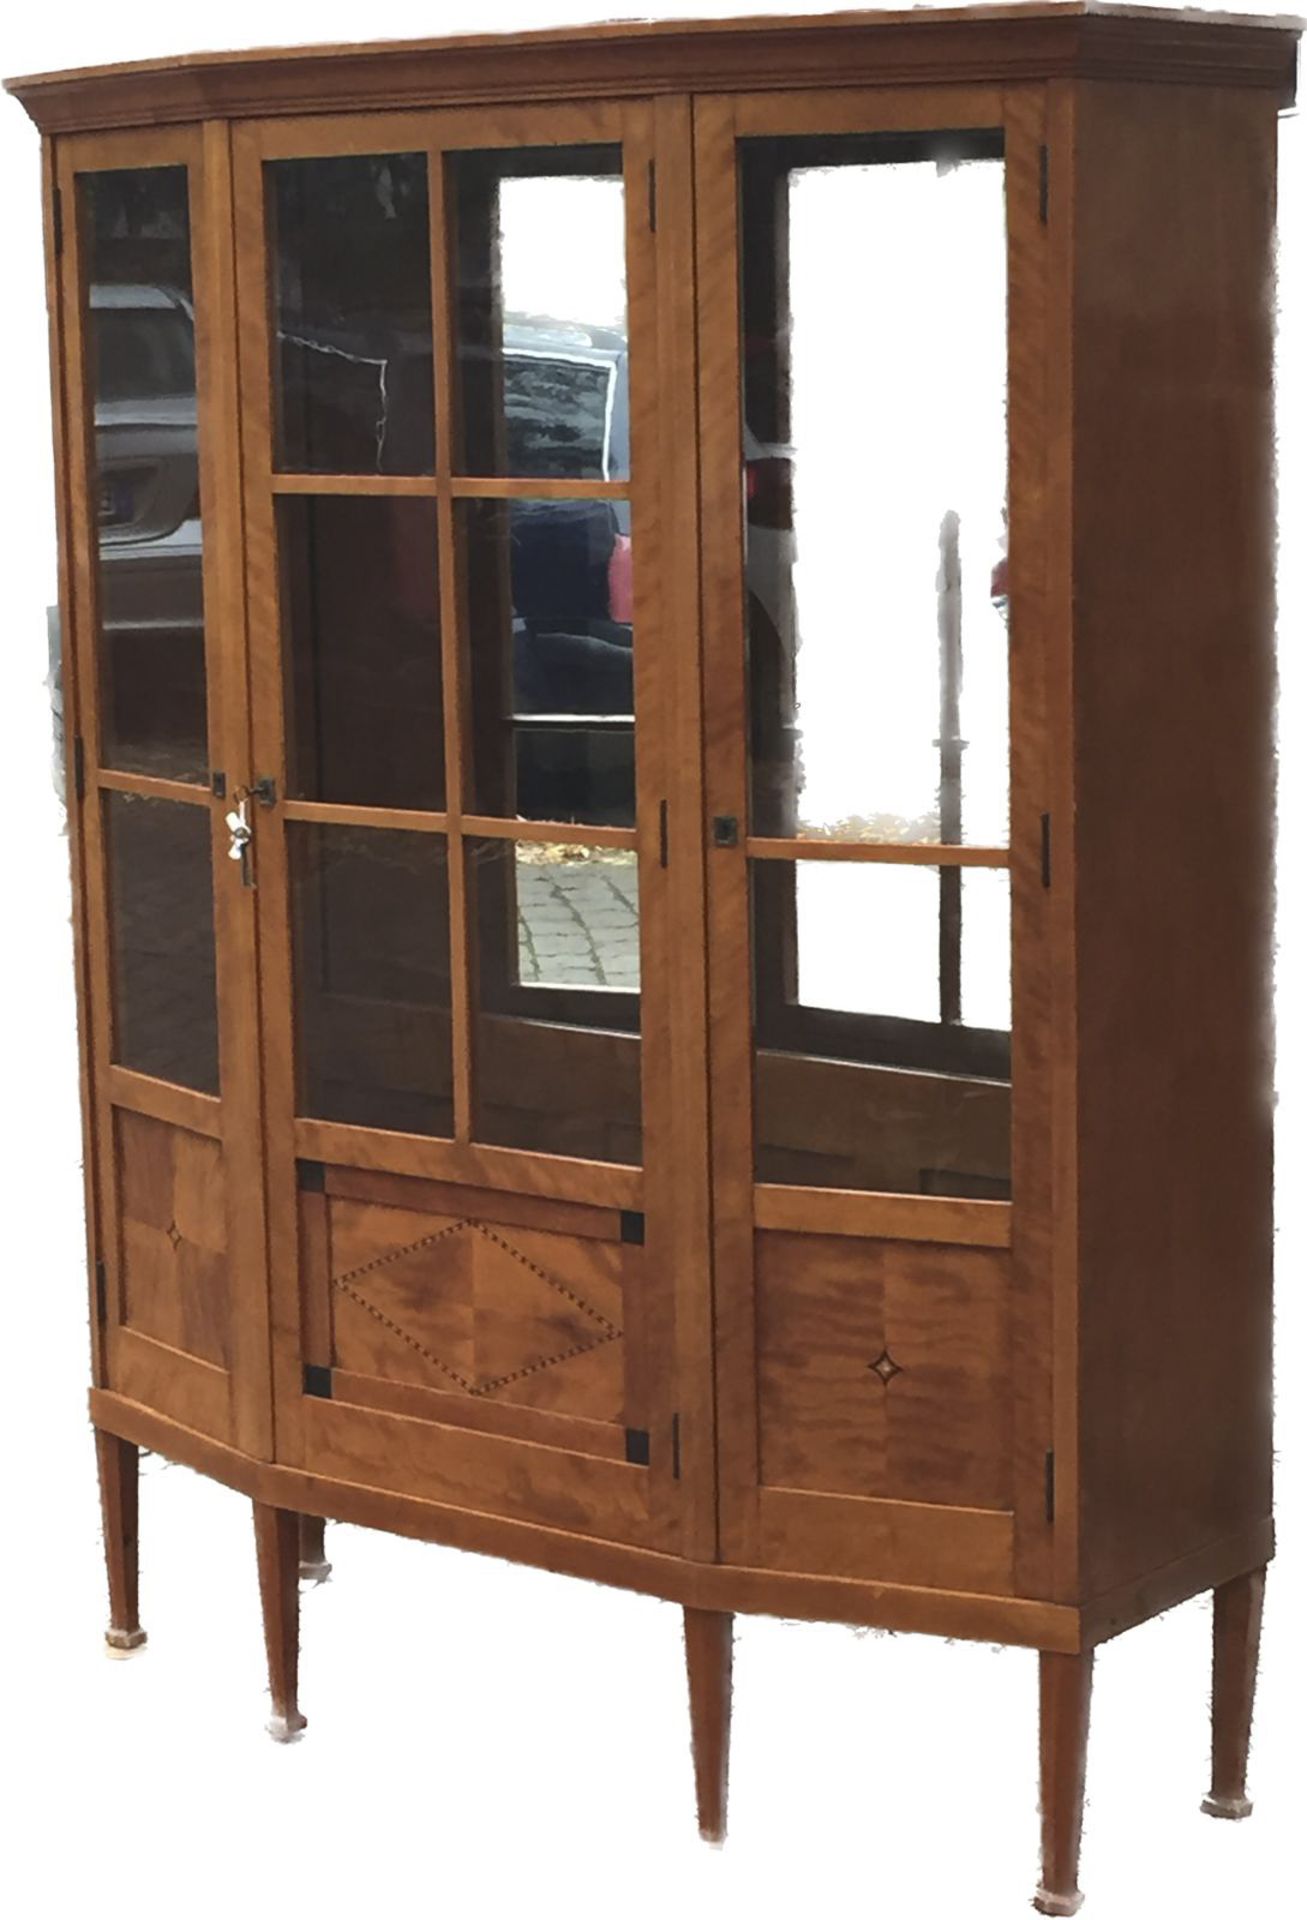 Glass cabinet in Biedermeier style around 1900/1910, mirrored back wall, 170 x 140 x 45 cm - The